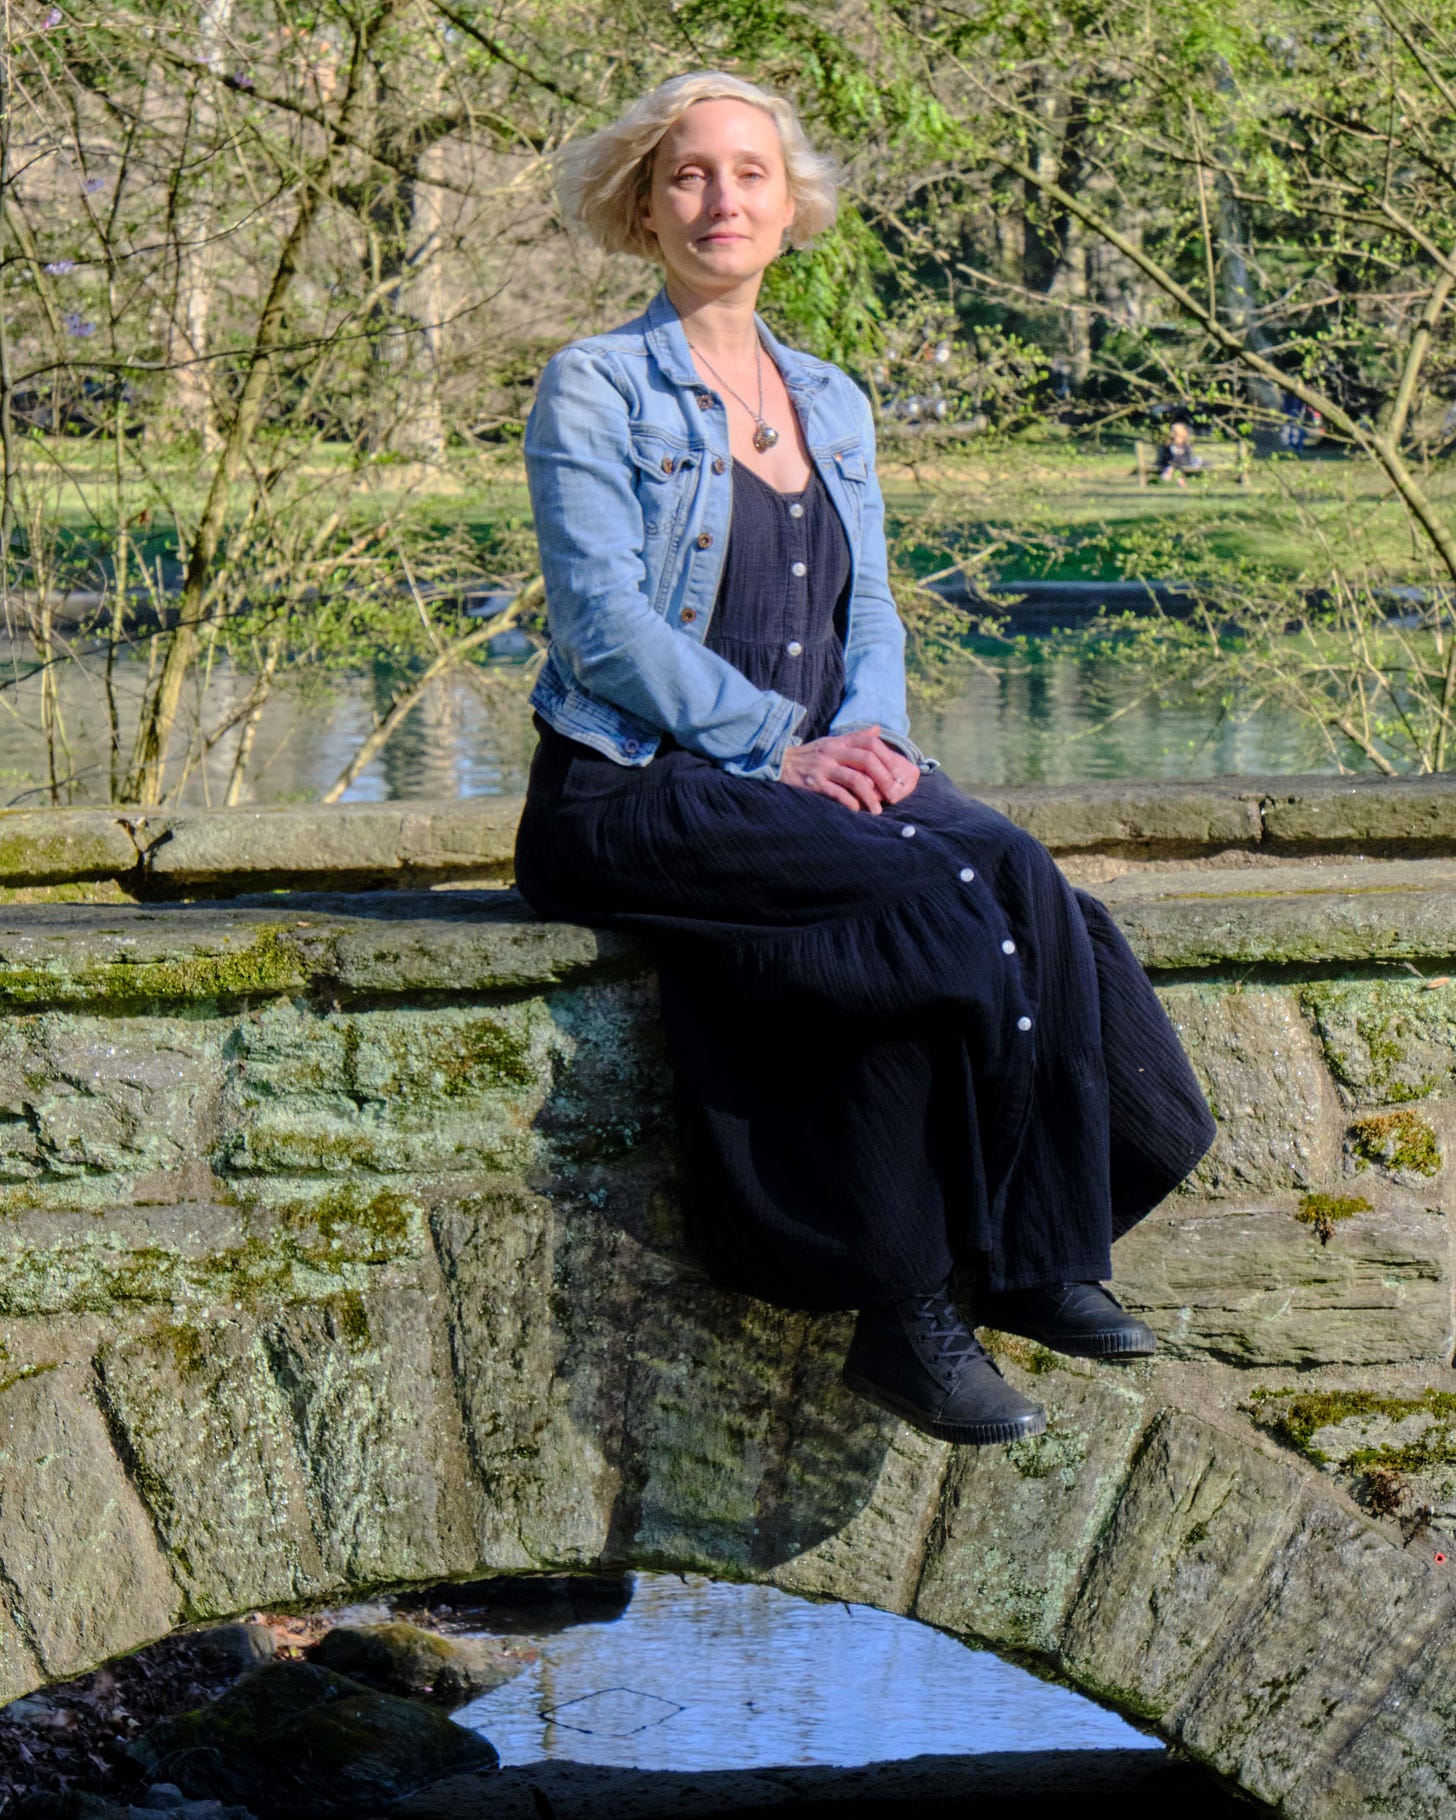 white woman with blond hair sits on a stone bridge in a park